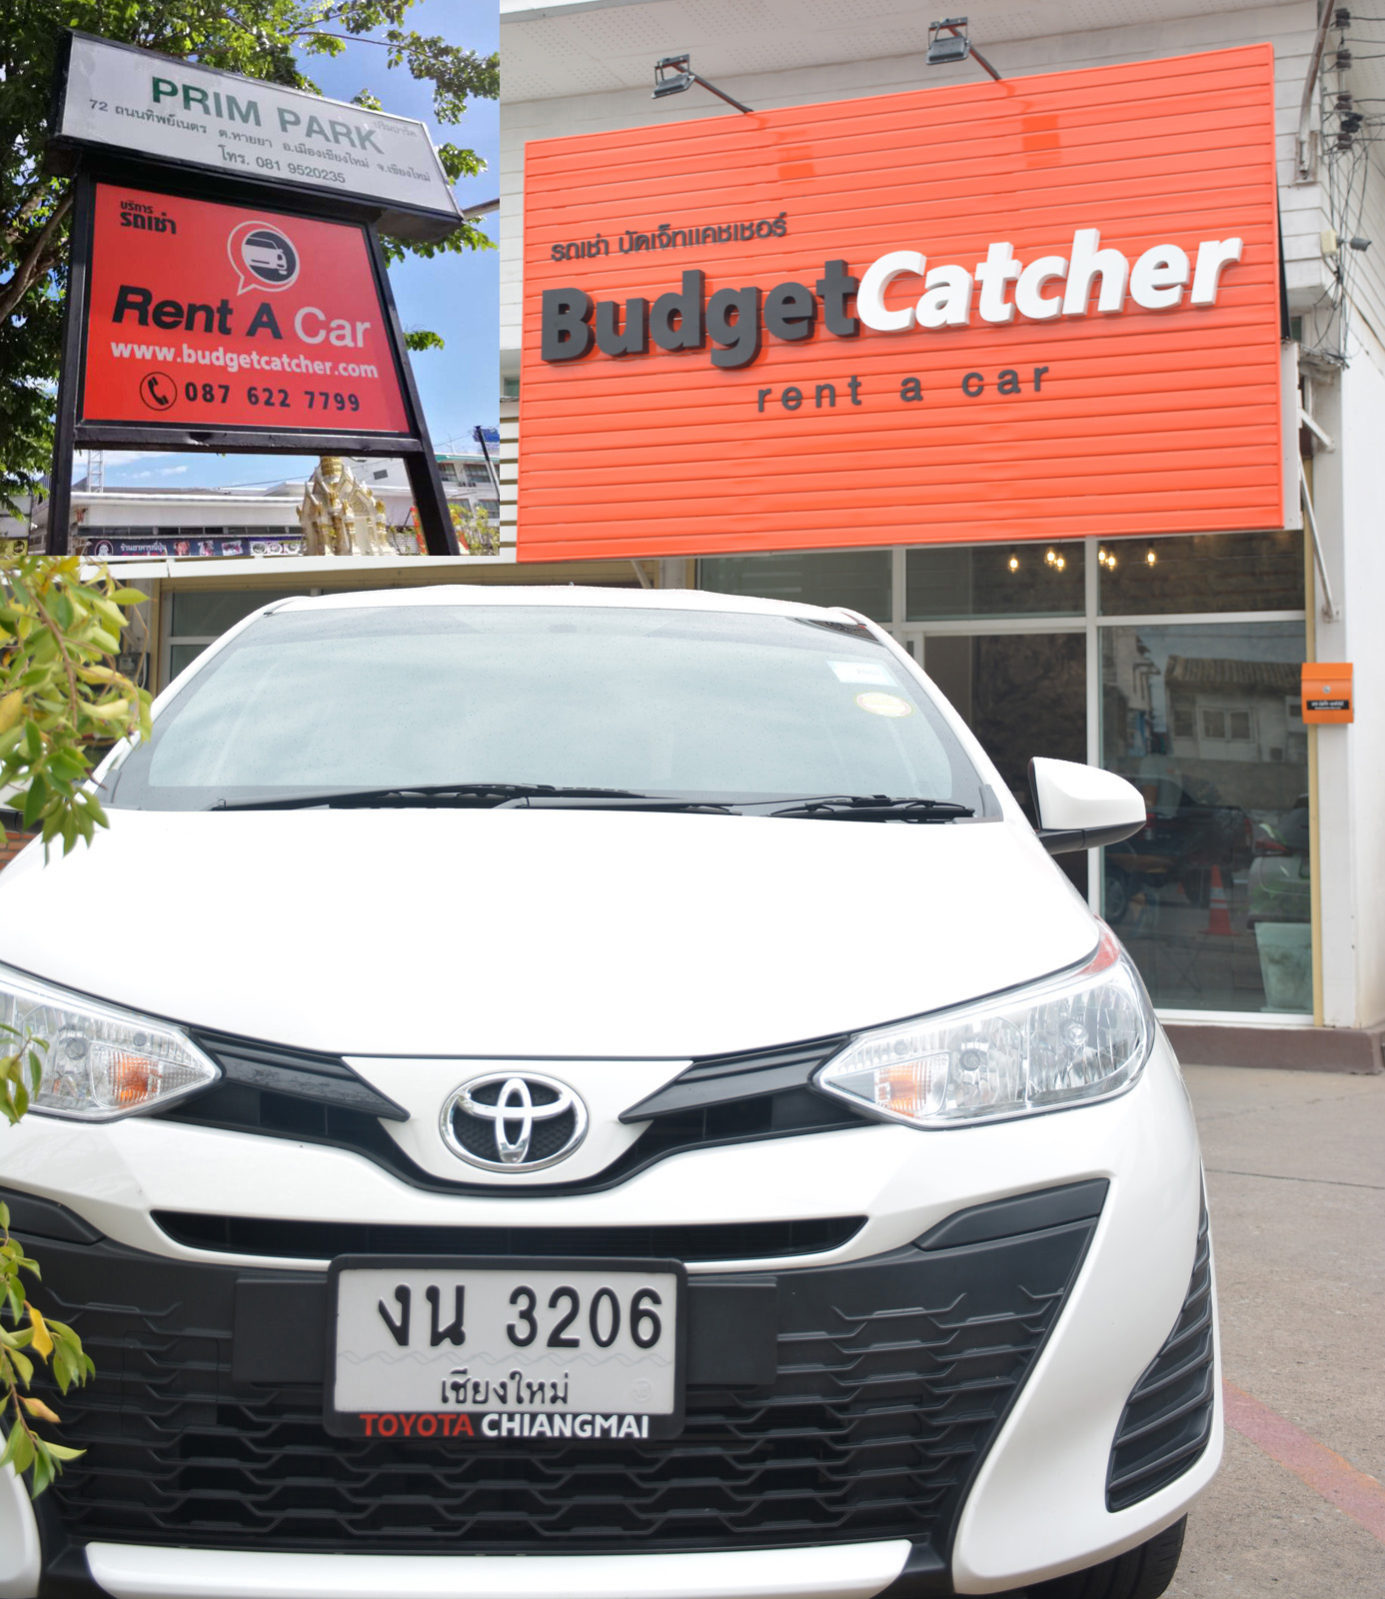 Budgetcatcher Rent a Car new office located in Chiangmai